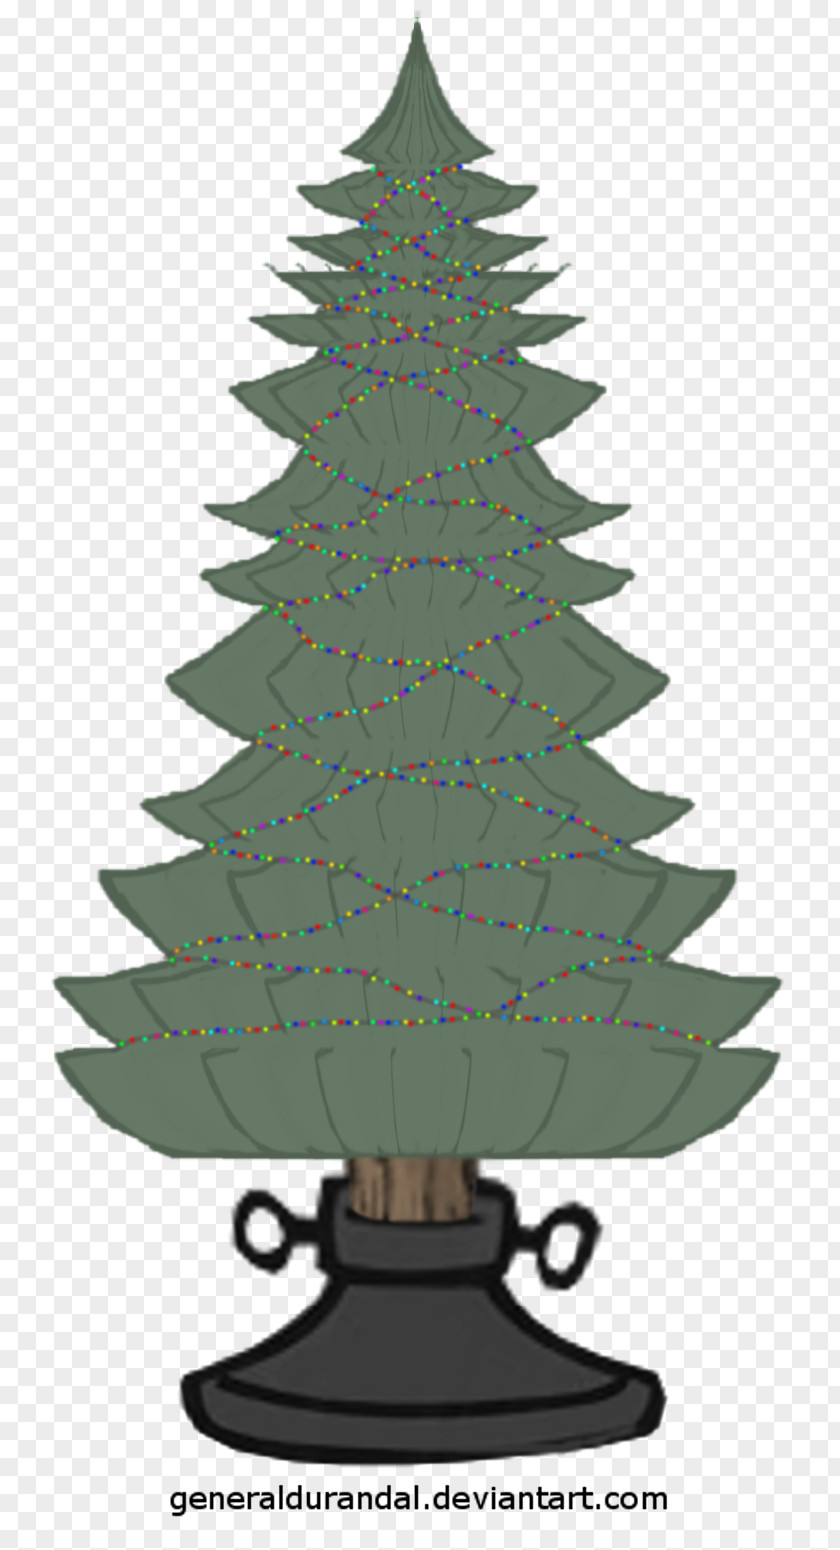 Christmas Tree Lighting Spruce Day Ornament Fir PNG